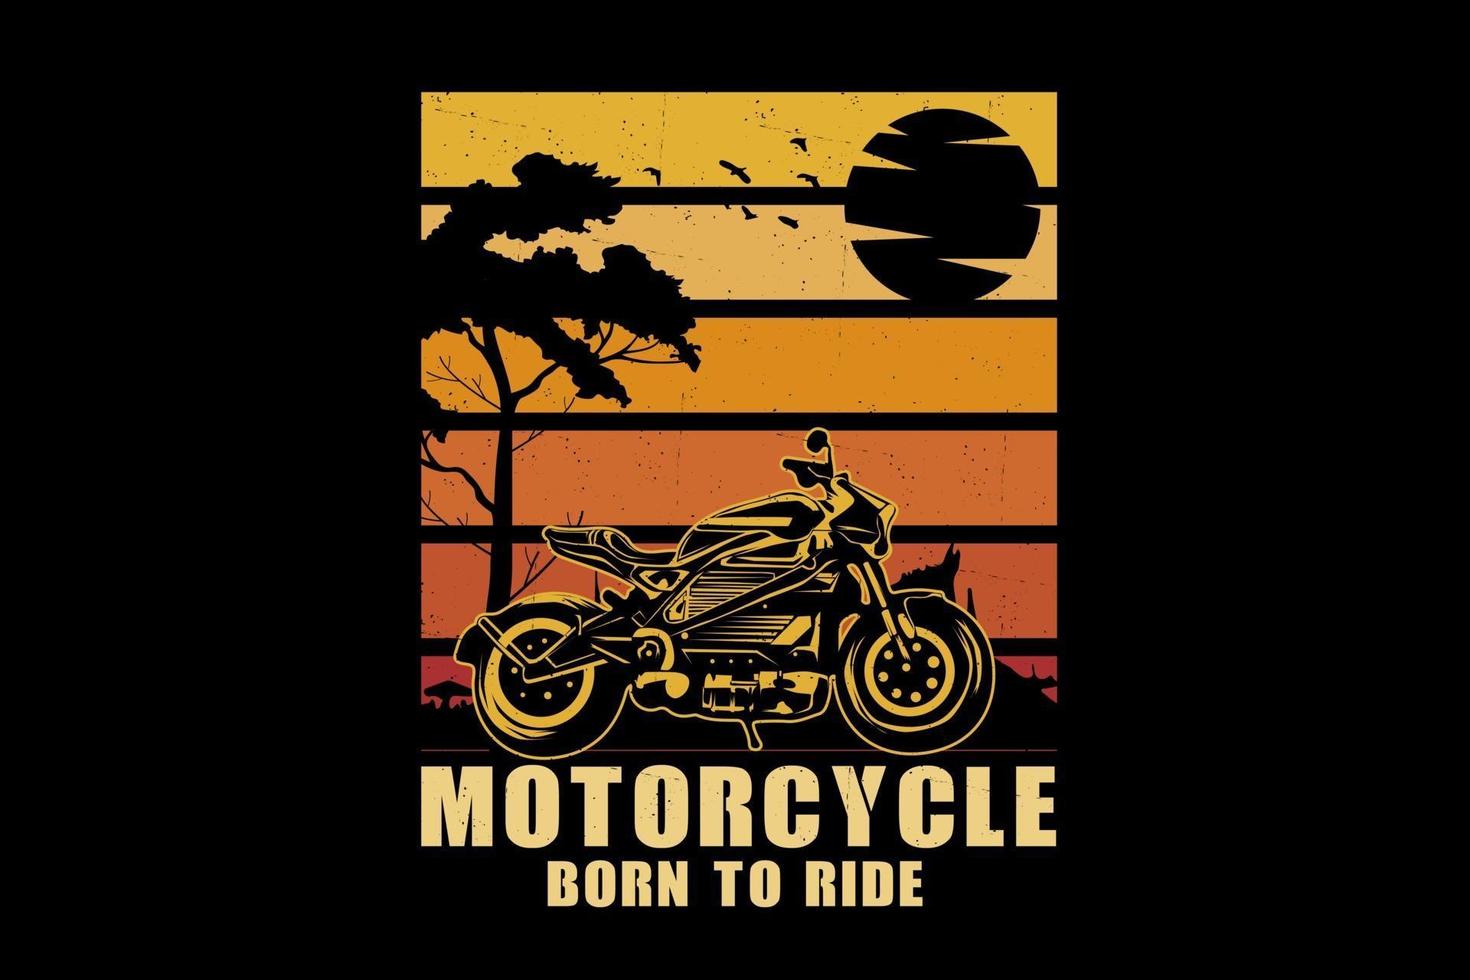 Motorcycle born to ride silhouette design vector